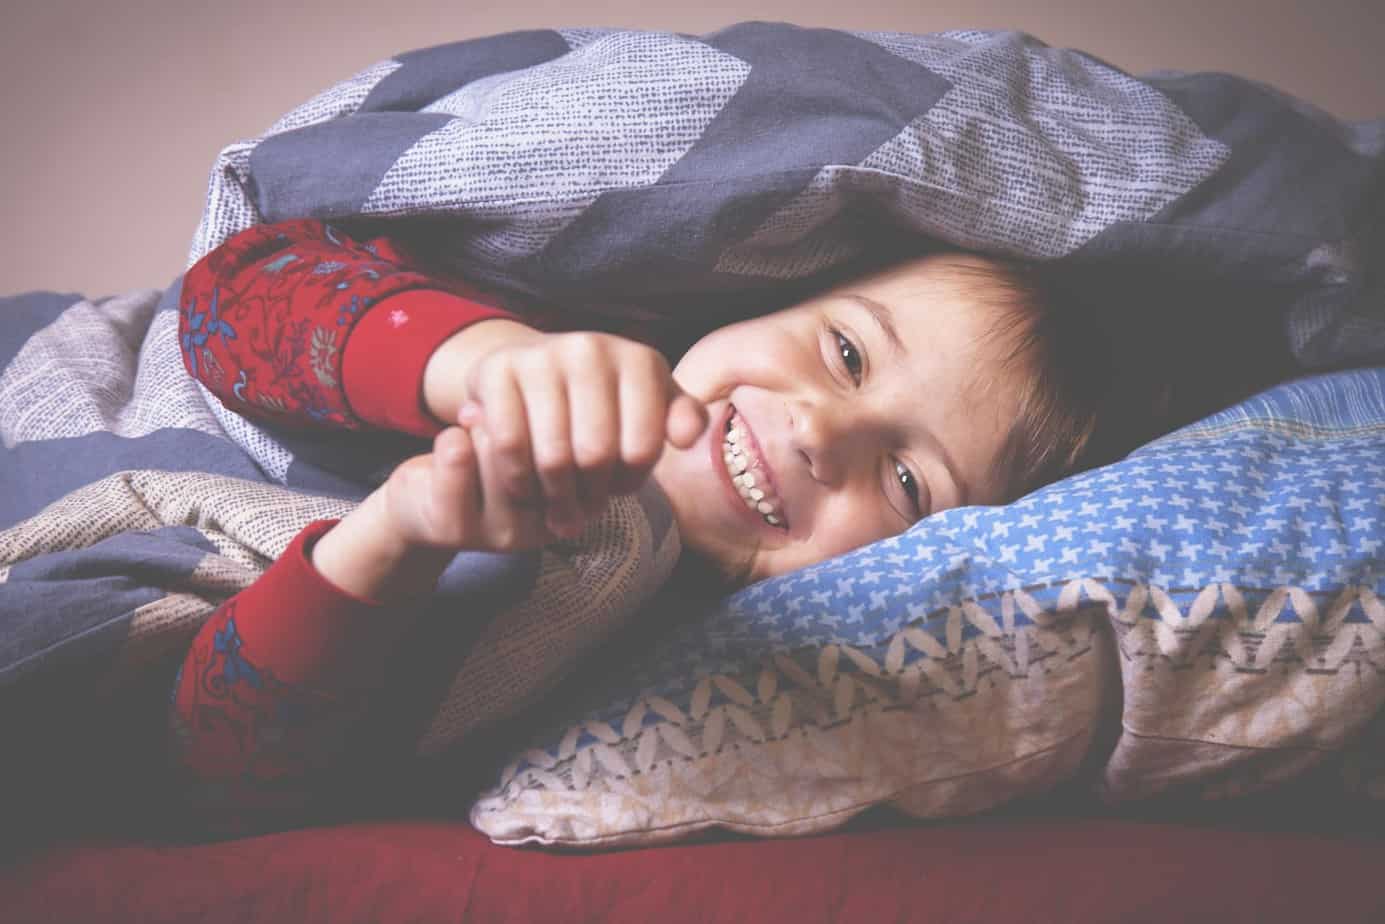 The surprisingly reason why power struggles happen at bedtime (and the surprisingly simple fix) and 7 ways to help perfect your child's bedtime routine.